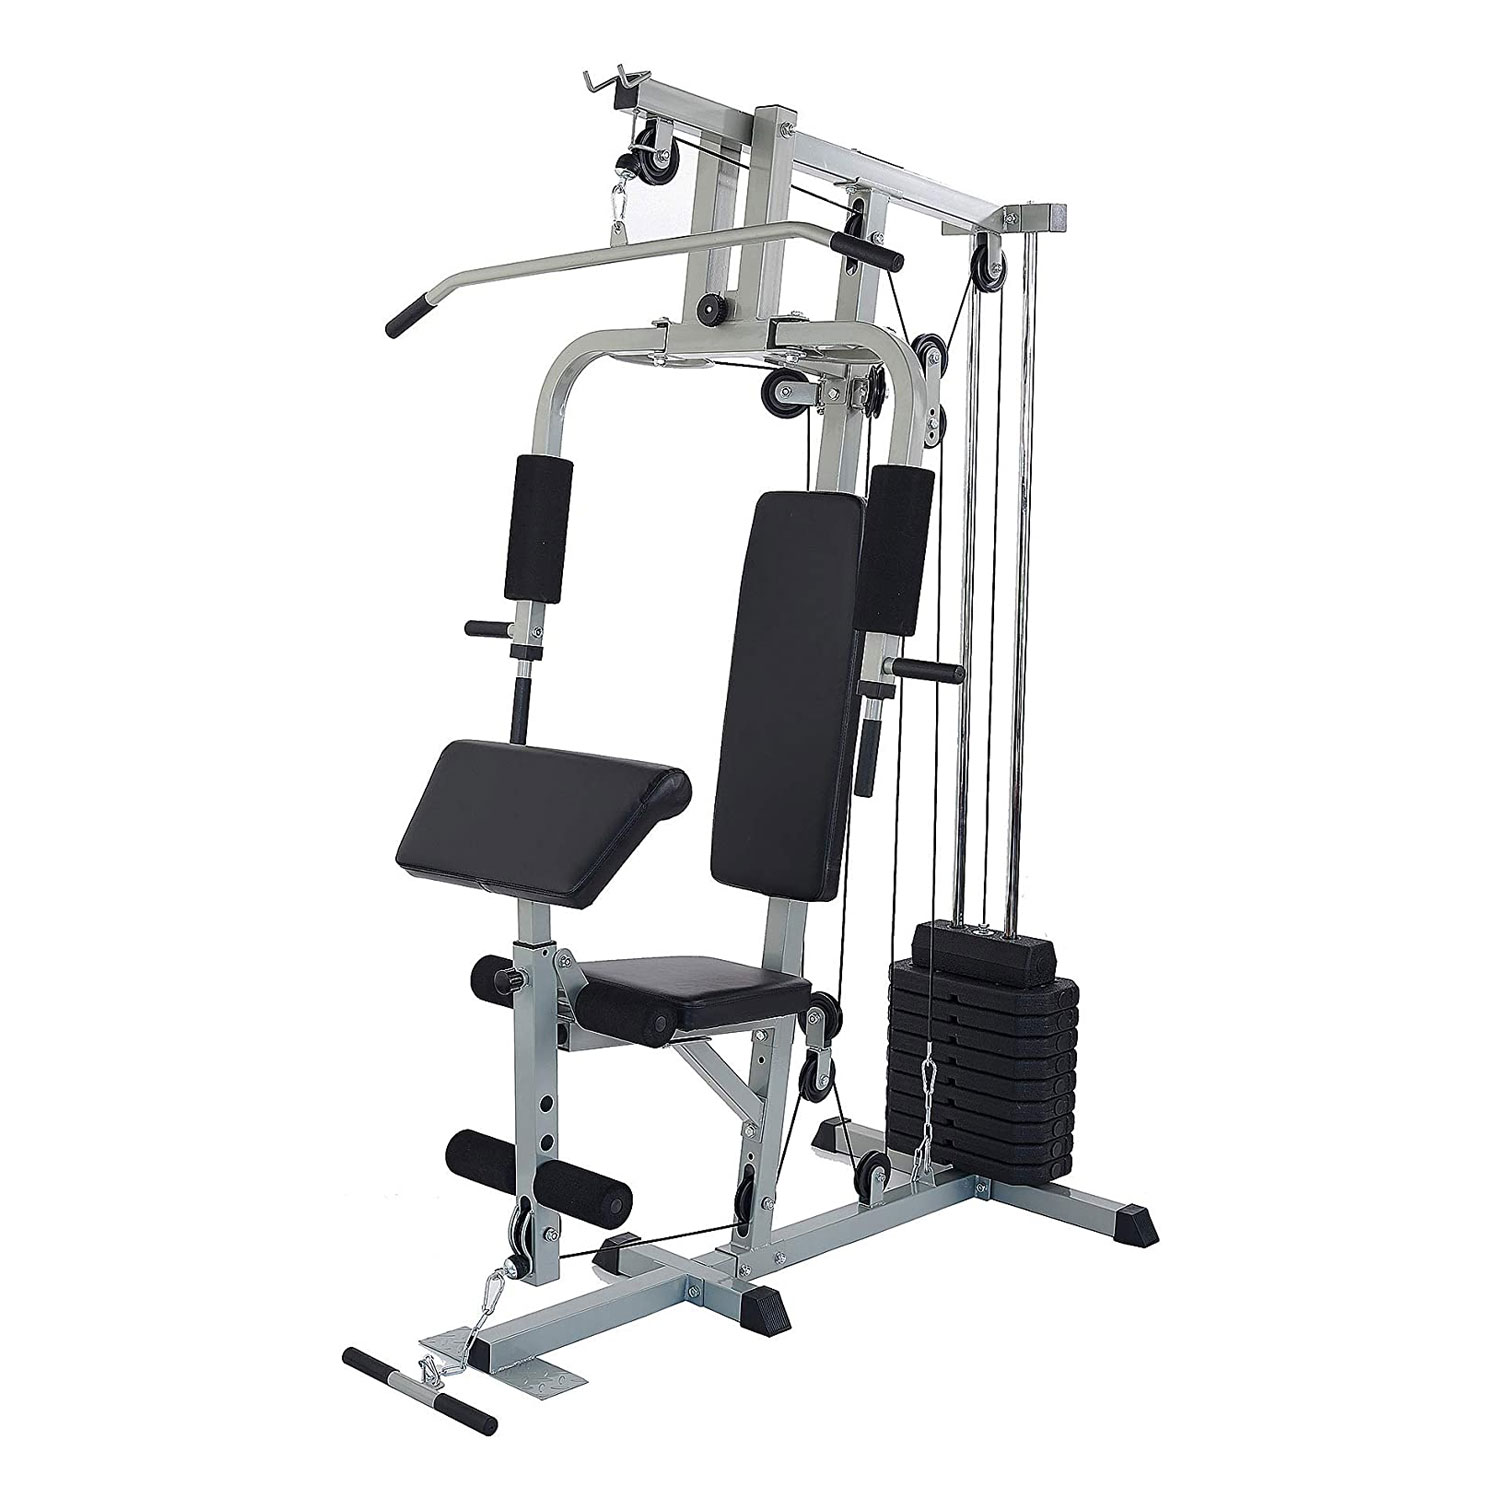 Everyday Essentials Home Gym Exercise Equipment Bench Strength Workout Station - image 1 of 10